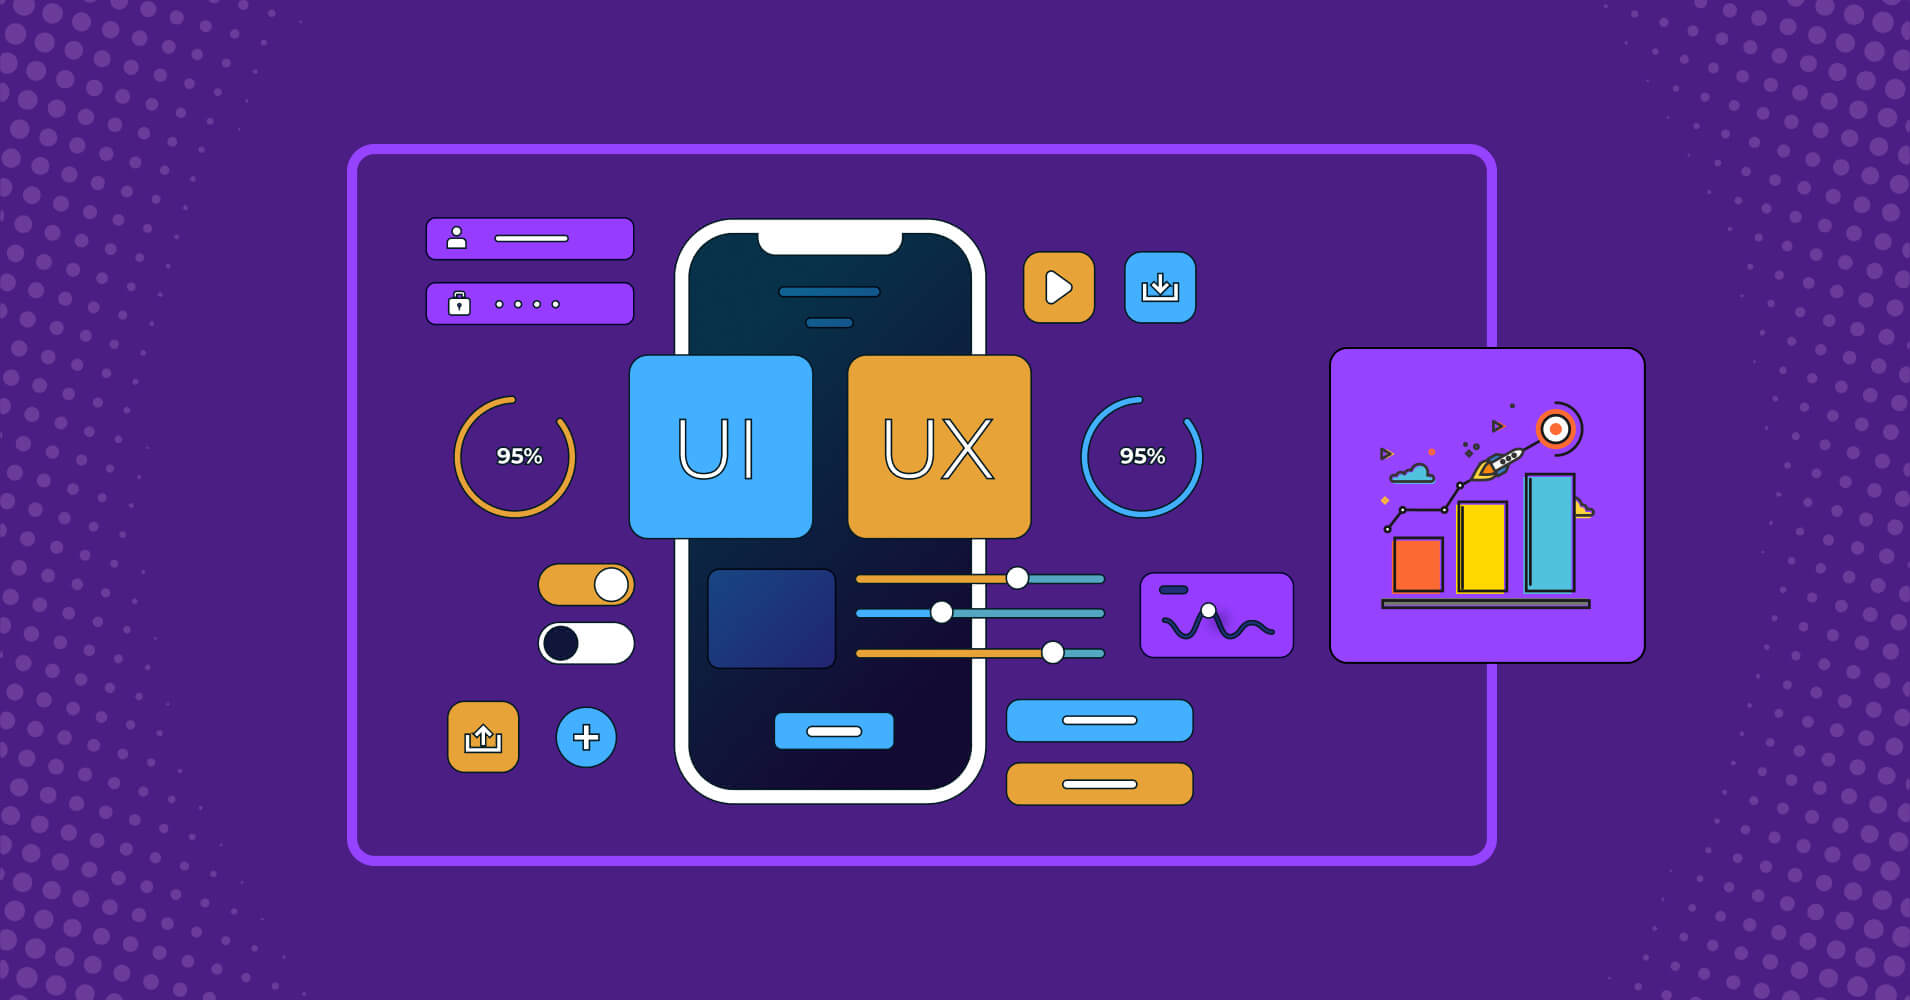 Decorative image of UI and UX